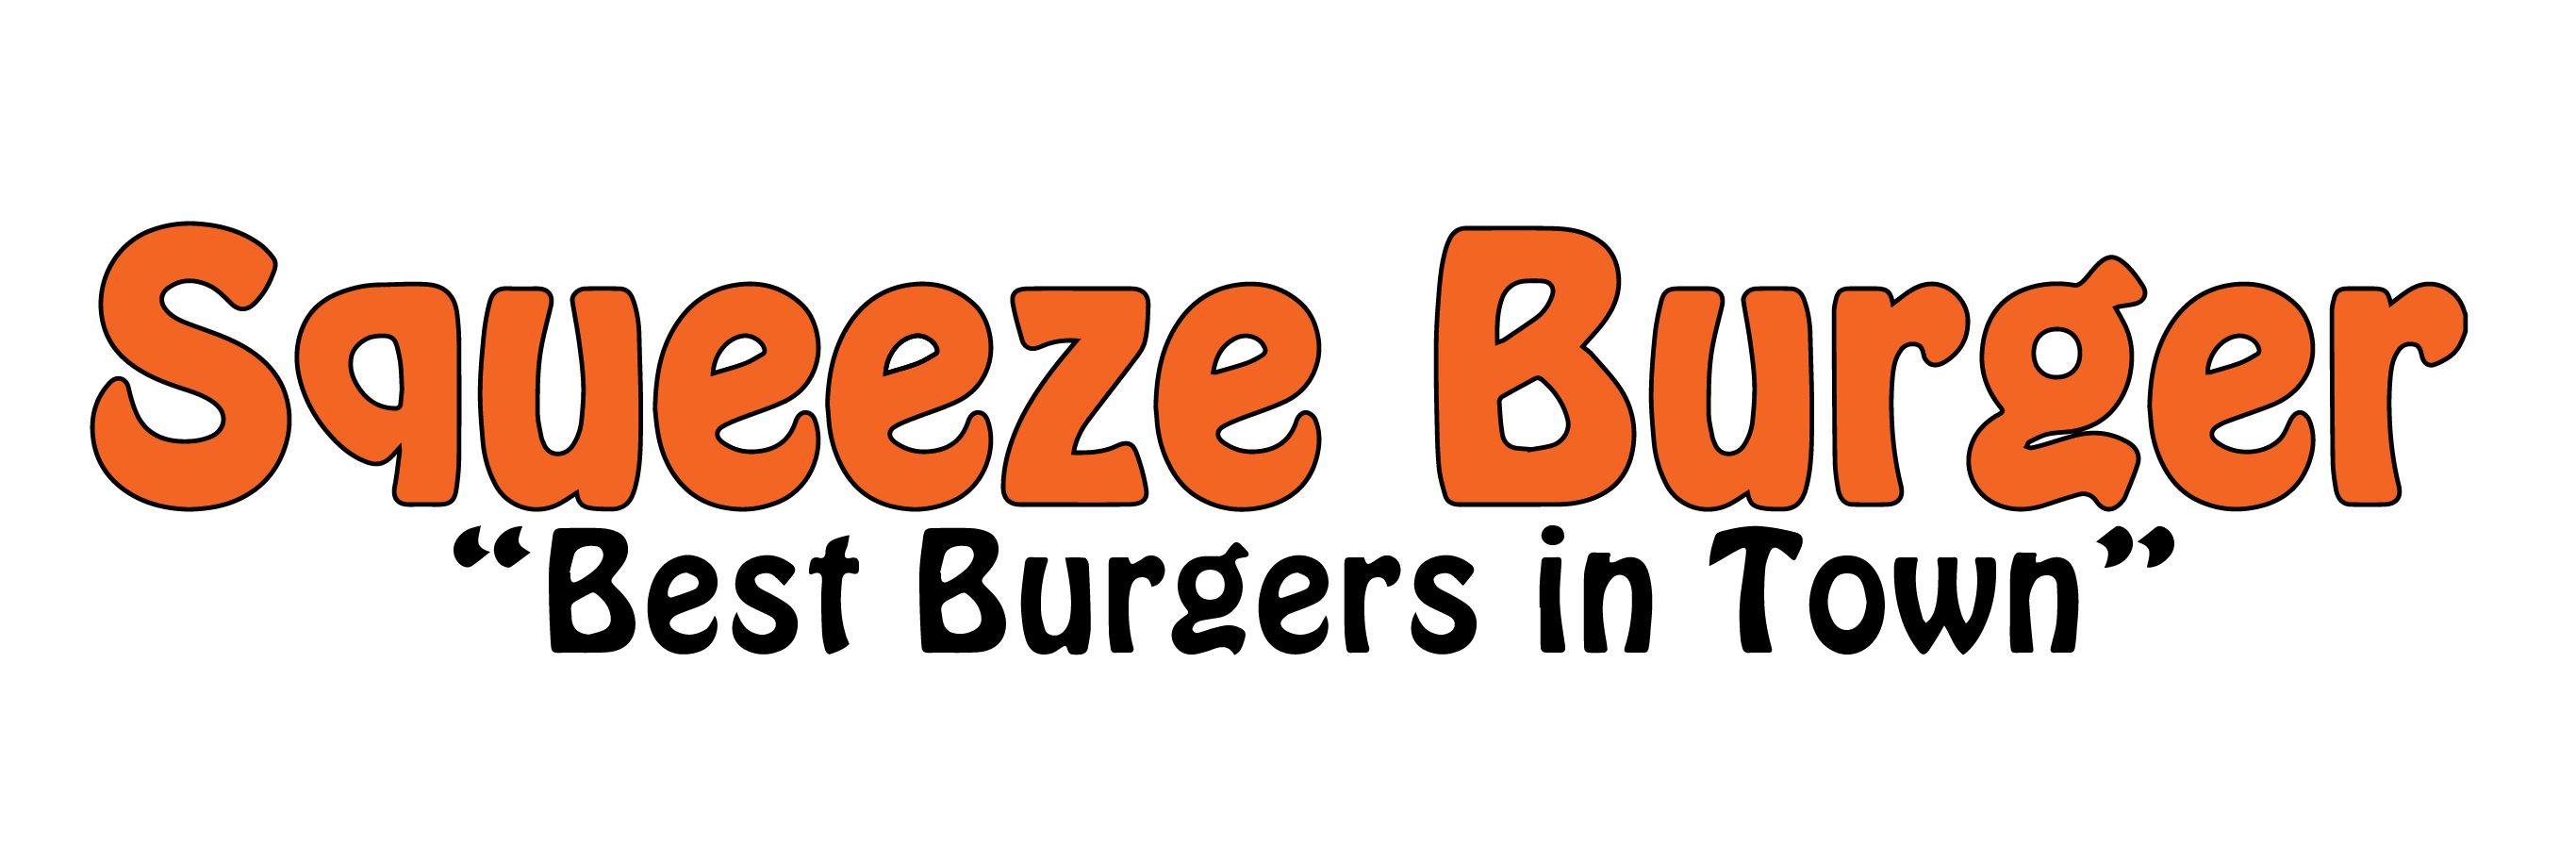 Squeeze Burger Roseville CA | The corner of Douglas and N. Sunrise or Book our Food Truck for your local events.